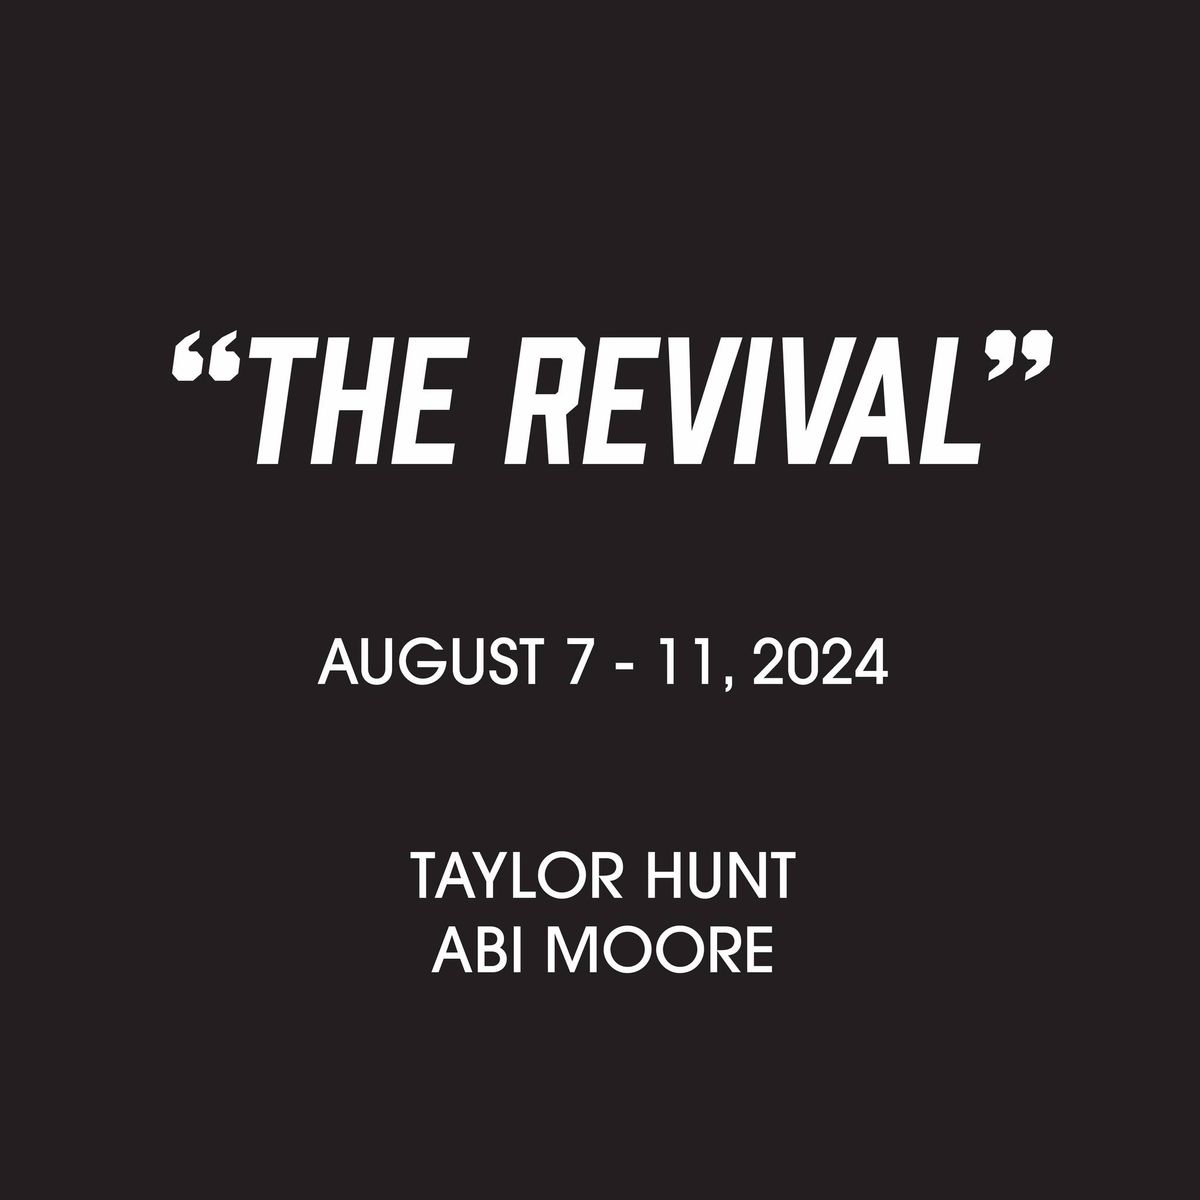 The Revival 